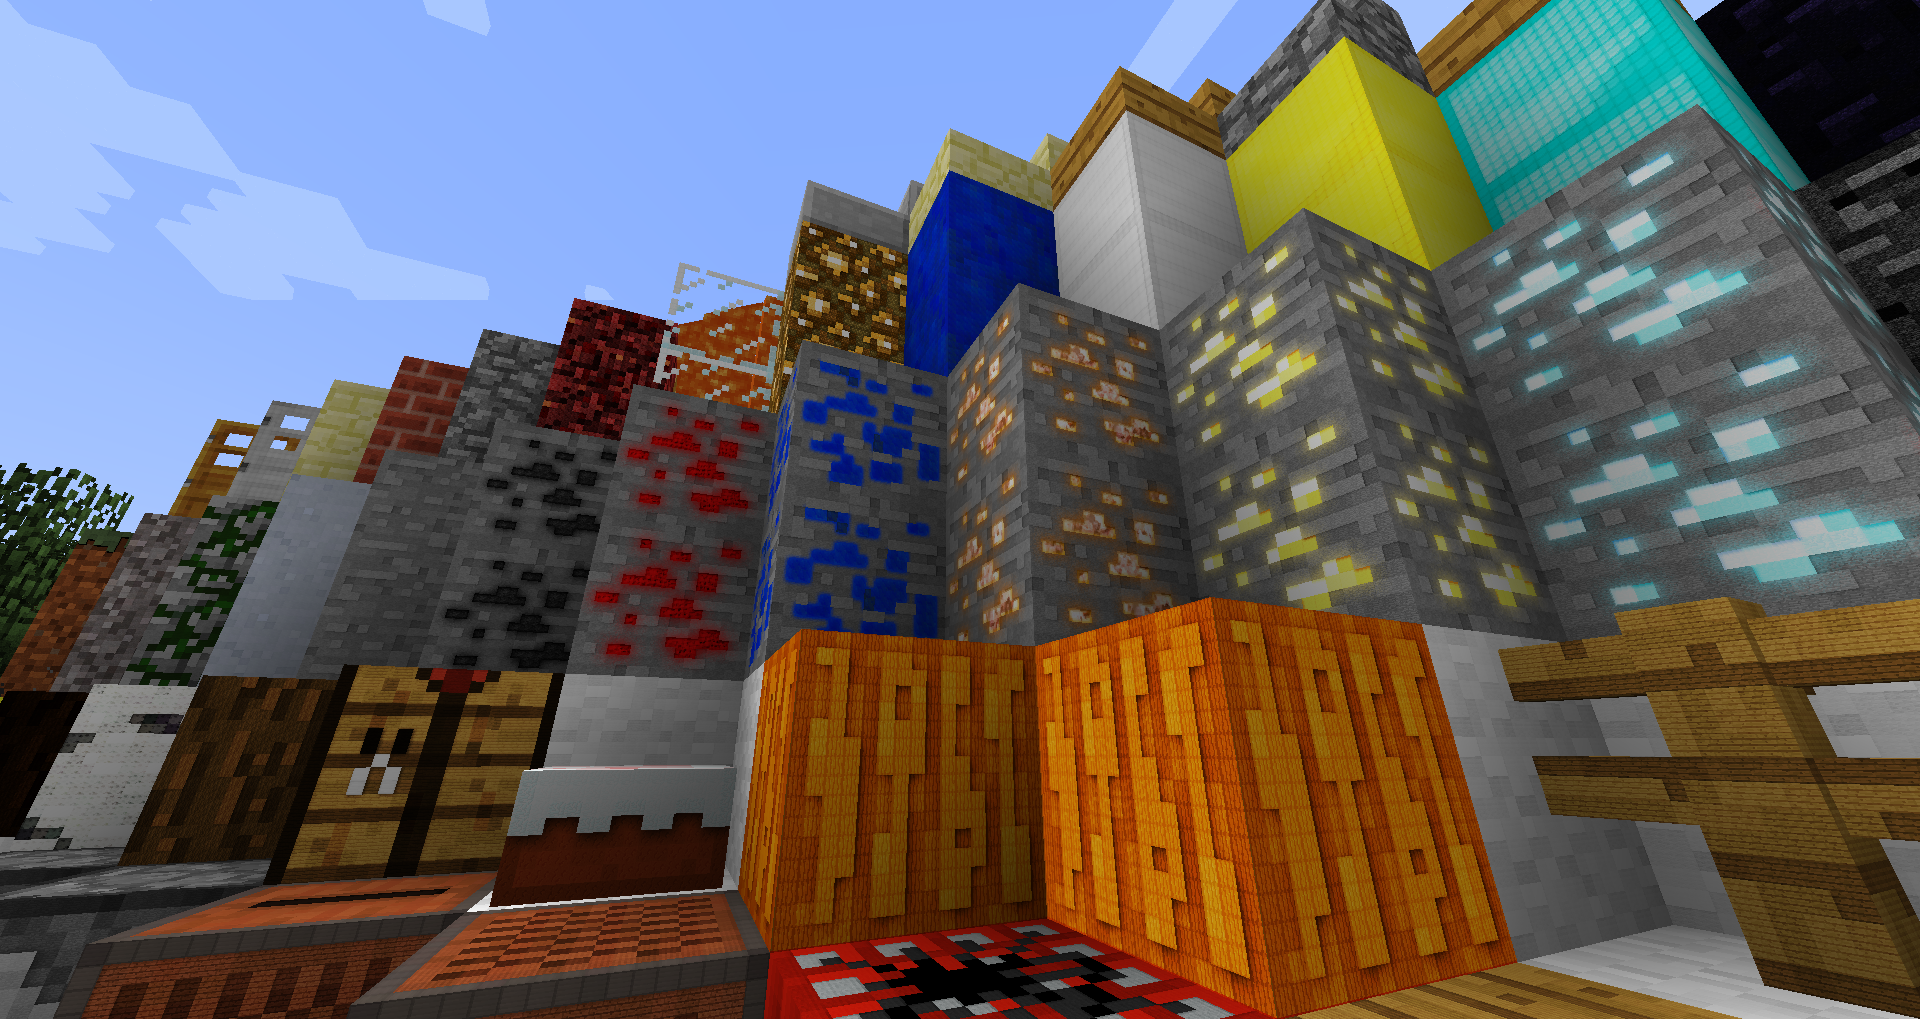 minecraft beta 1.7.3 deafult texture pack download